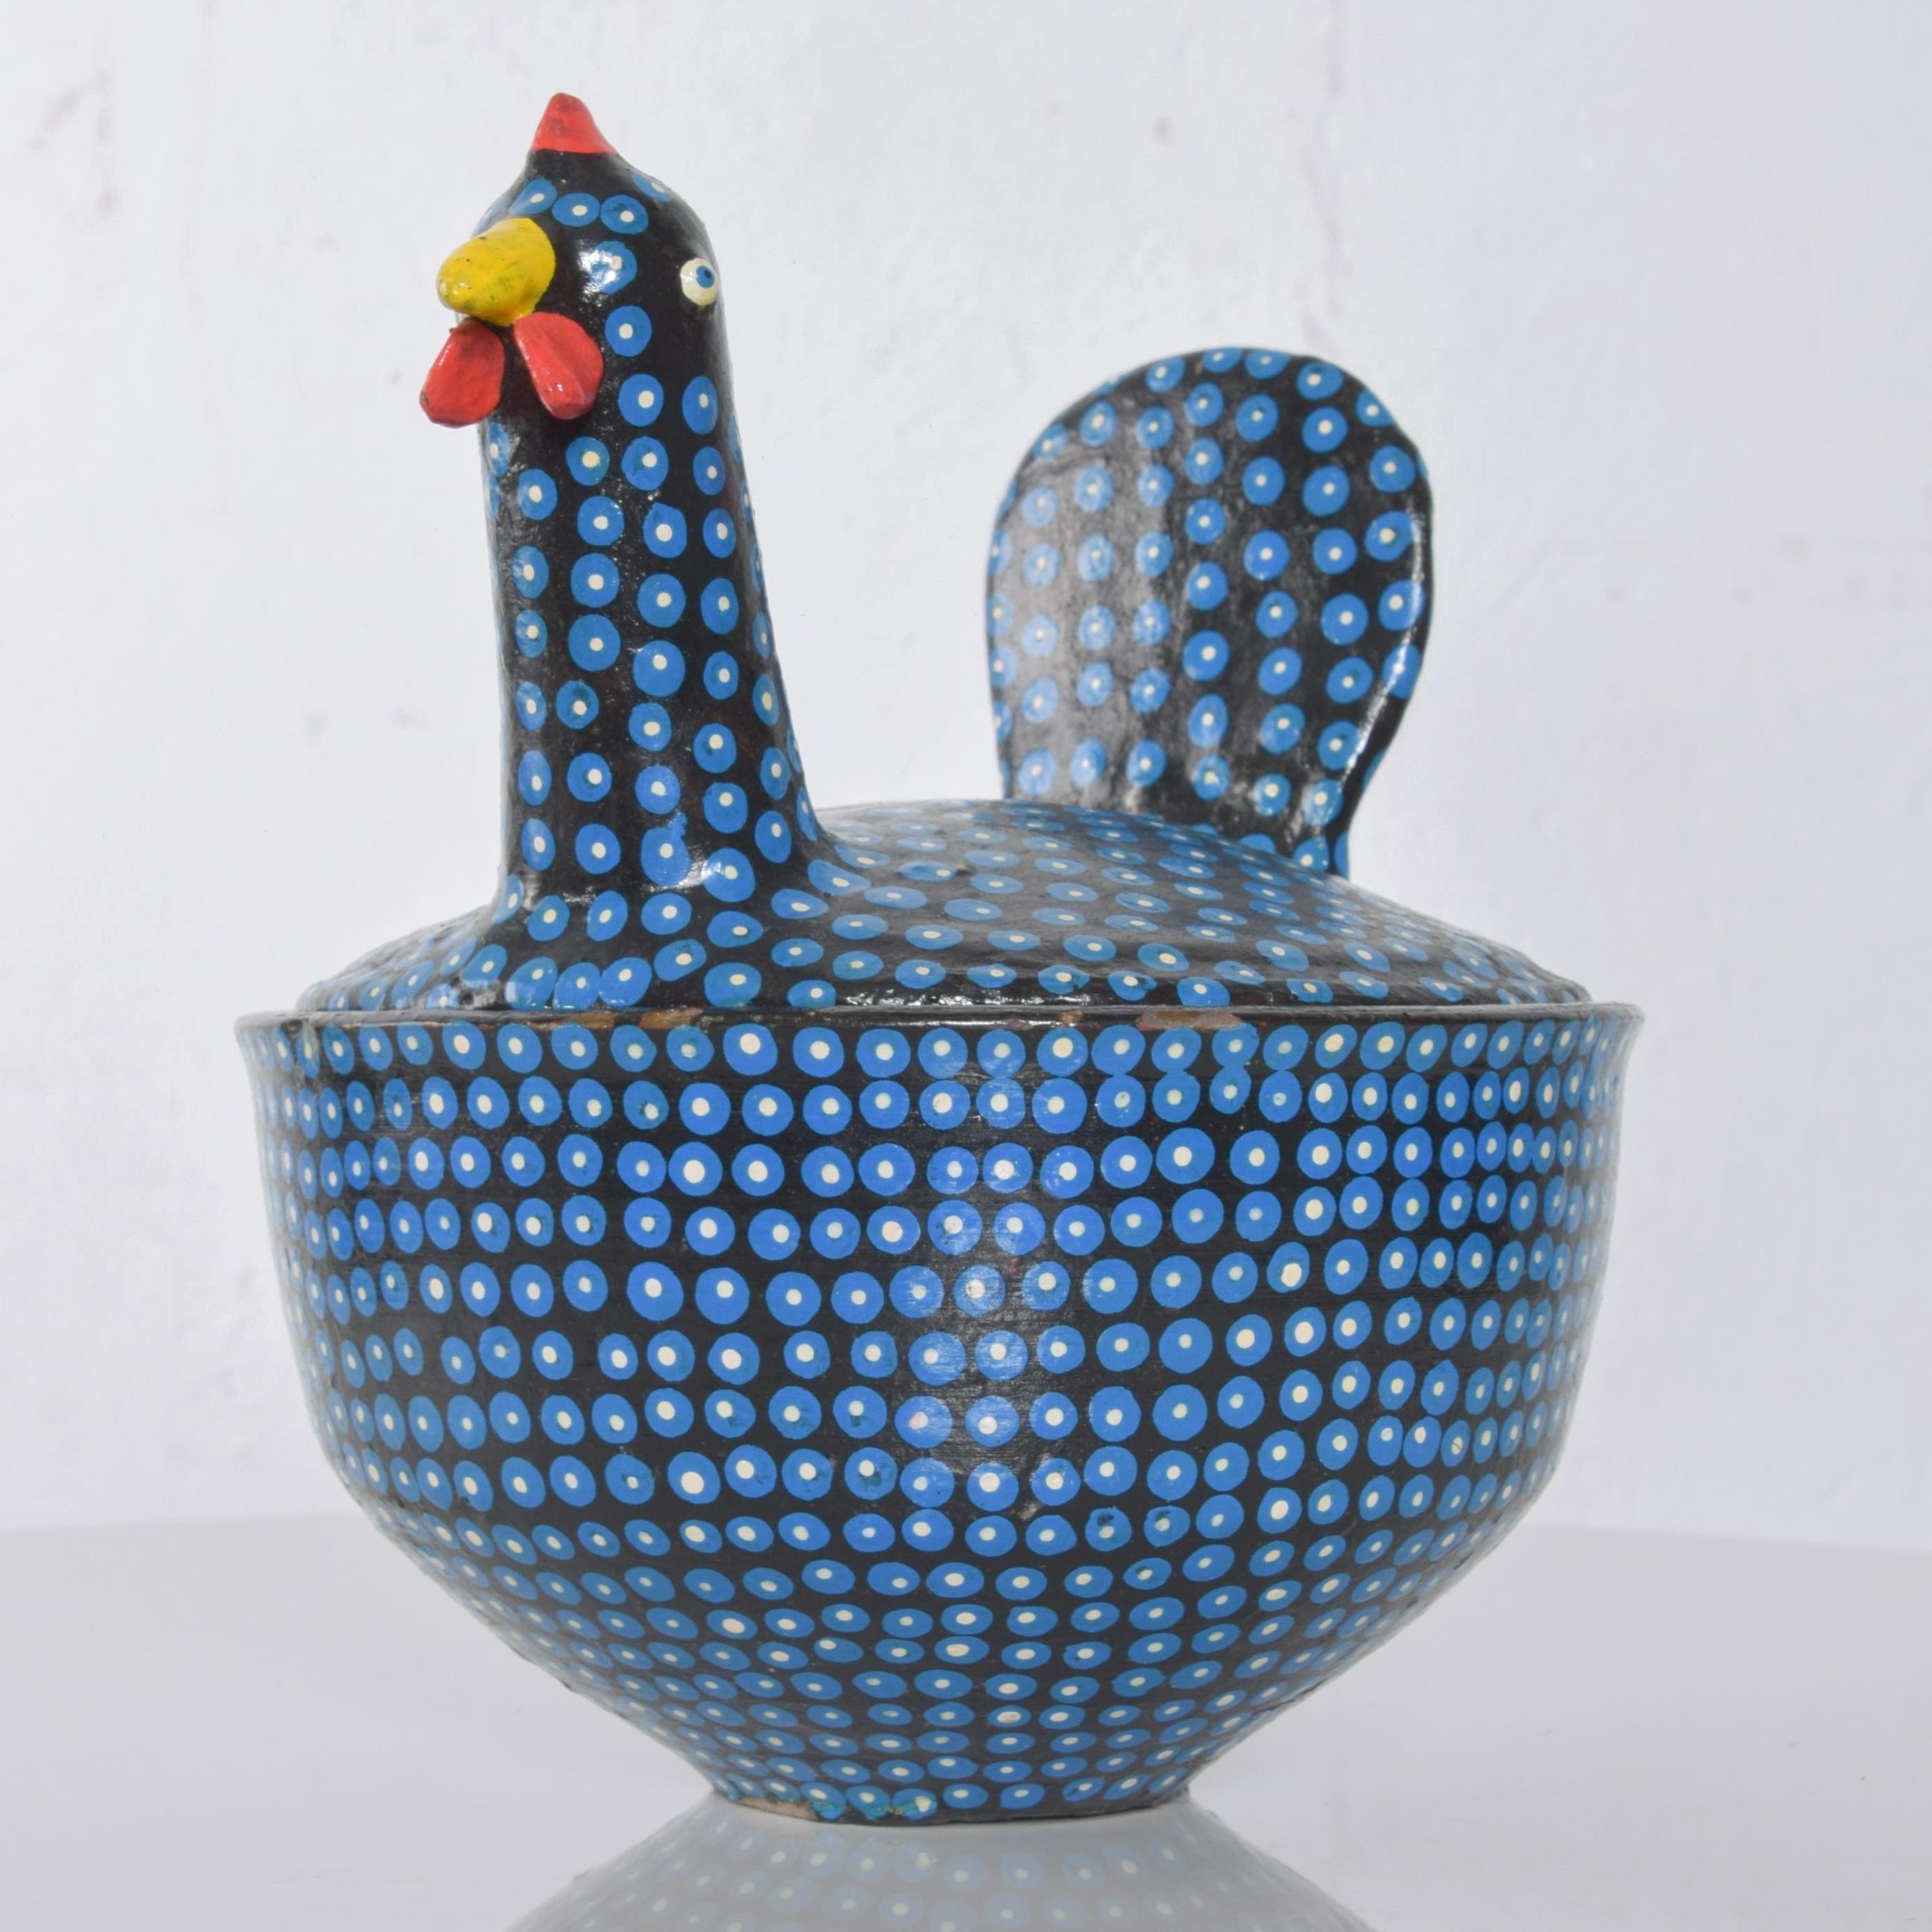 1970s modern hand painted blue colorful covered rooster chicken hen on nest ceramic pot with splashy red interior vintage midcentury delight!
Measures: 7.5 height x 7 in diameter
Original unrestored preowned no label condition. See images.